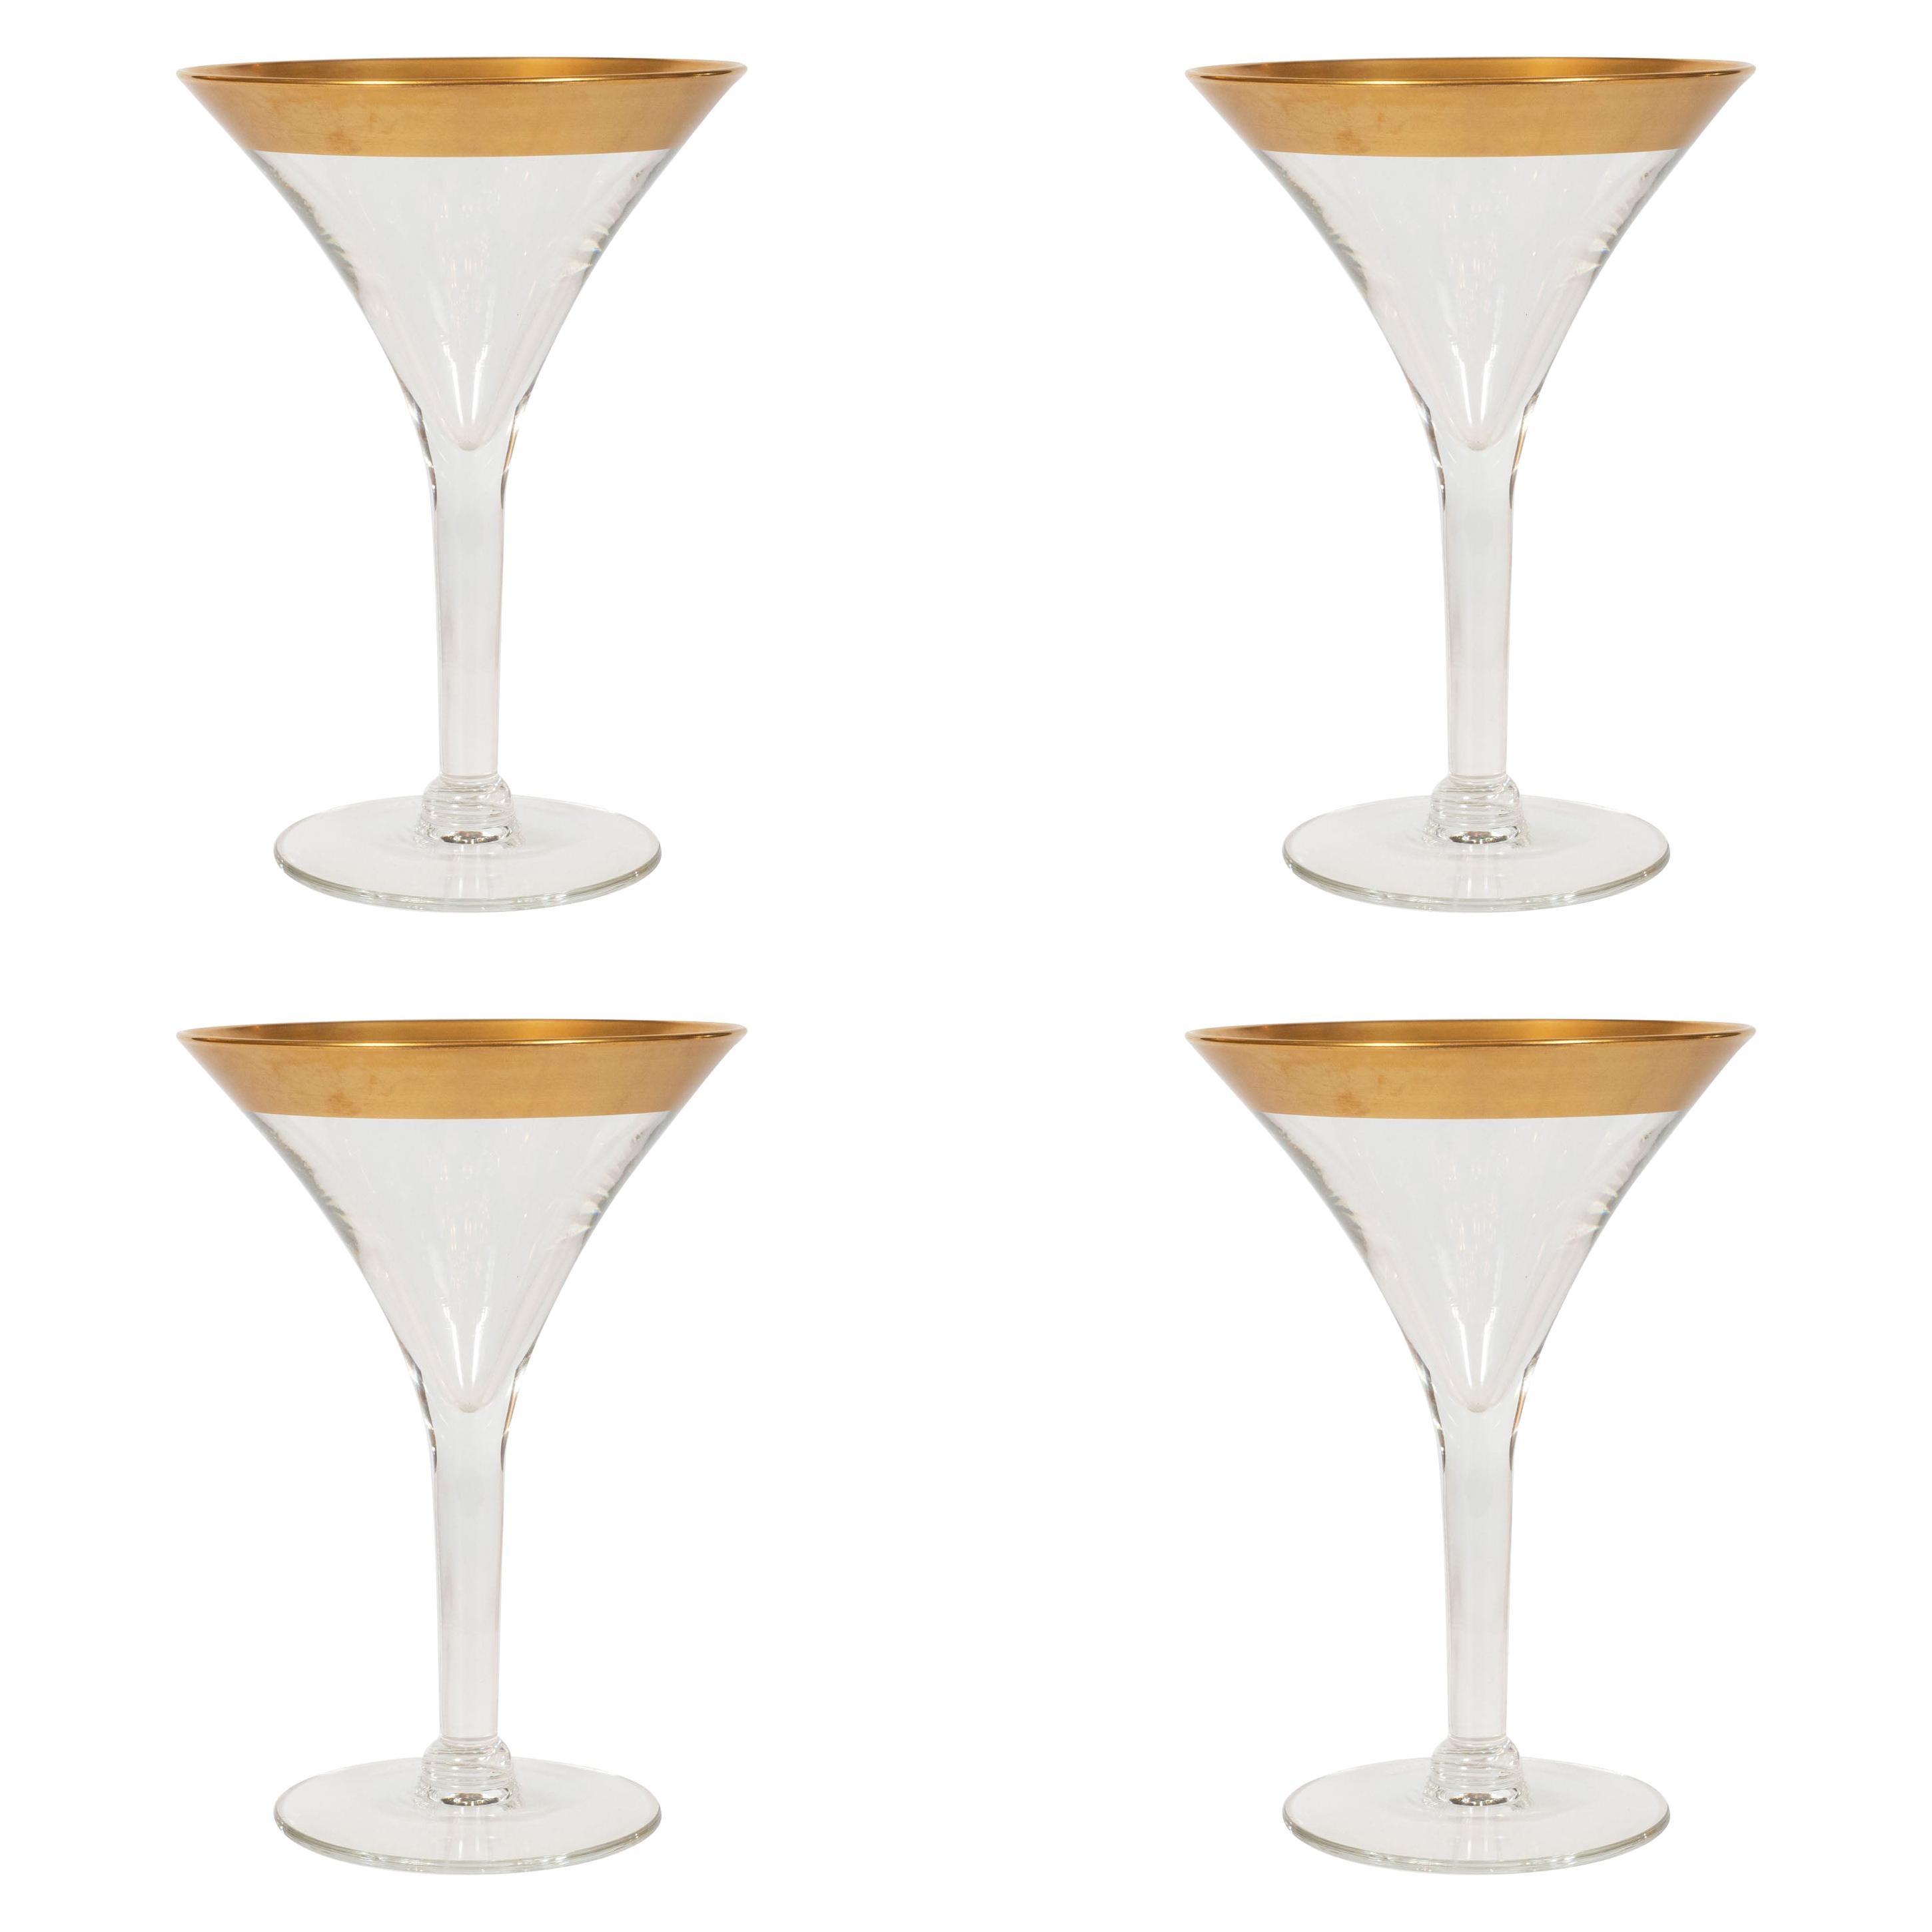 Set of Four Midcentury Gold Rimmed Champagne/ Martini Glasses by Dorothy Thorpe